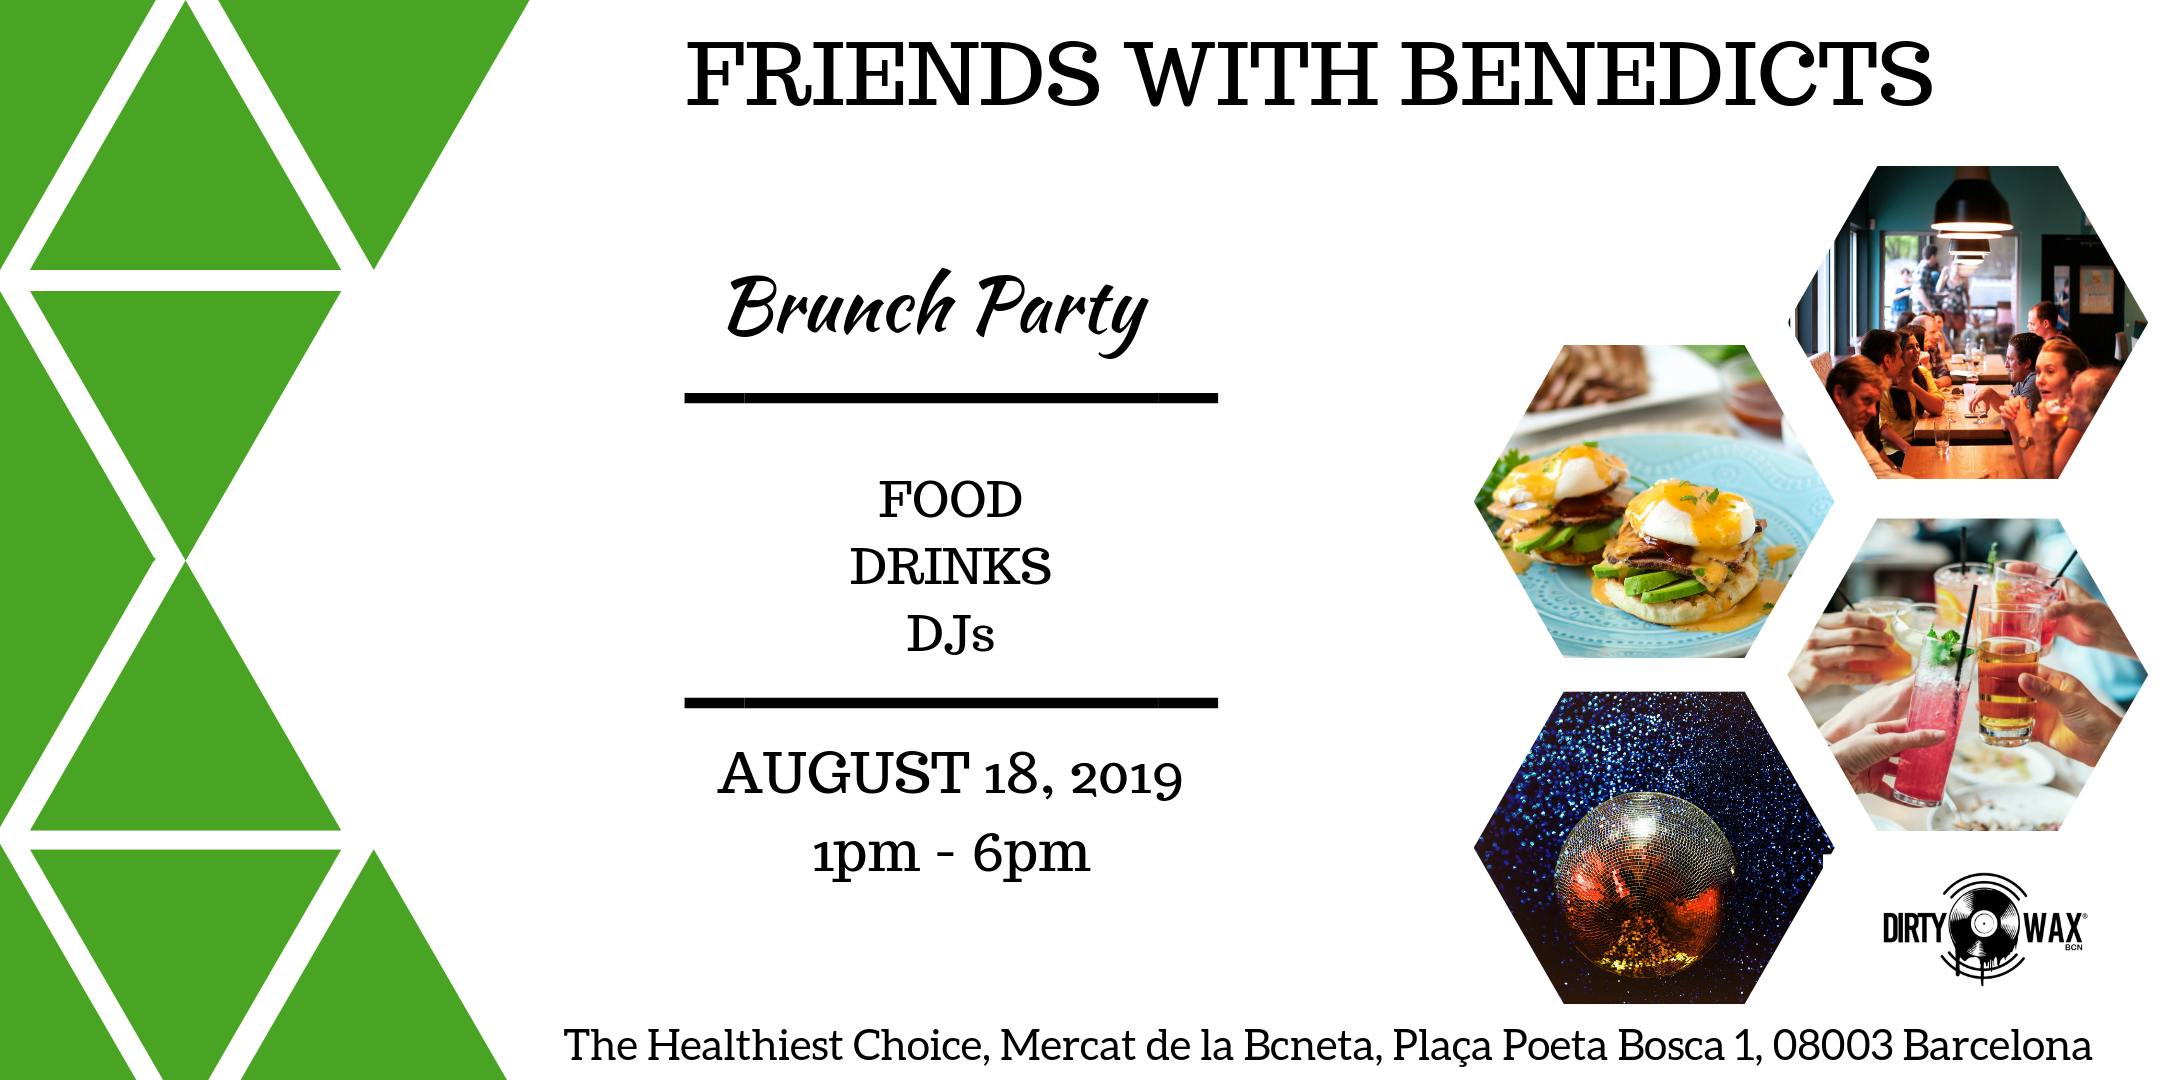 Friends with Benedicts Brunch Party